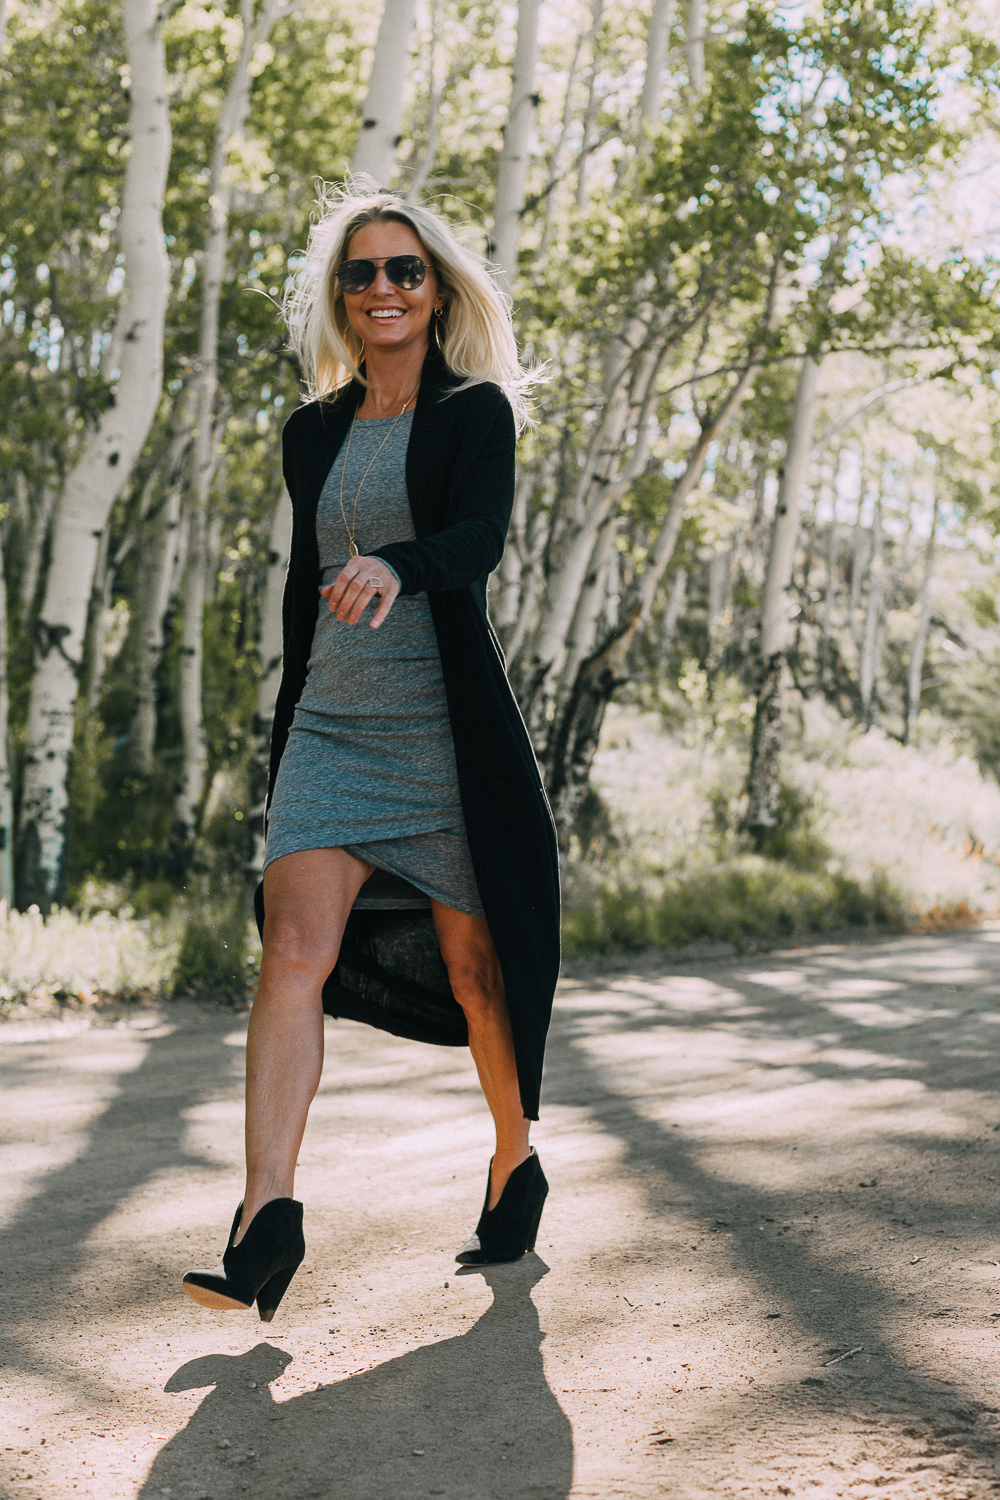 fall booties 2018 featuring black dressy booties by Vince Camuto in black suede paired with a ruched gray t-shirt dress with long sleeves and a long black cardigan sweater on fashion blogger over 40, Erin Busbee of Busbee Style